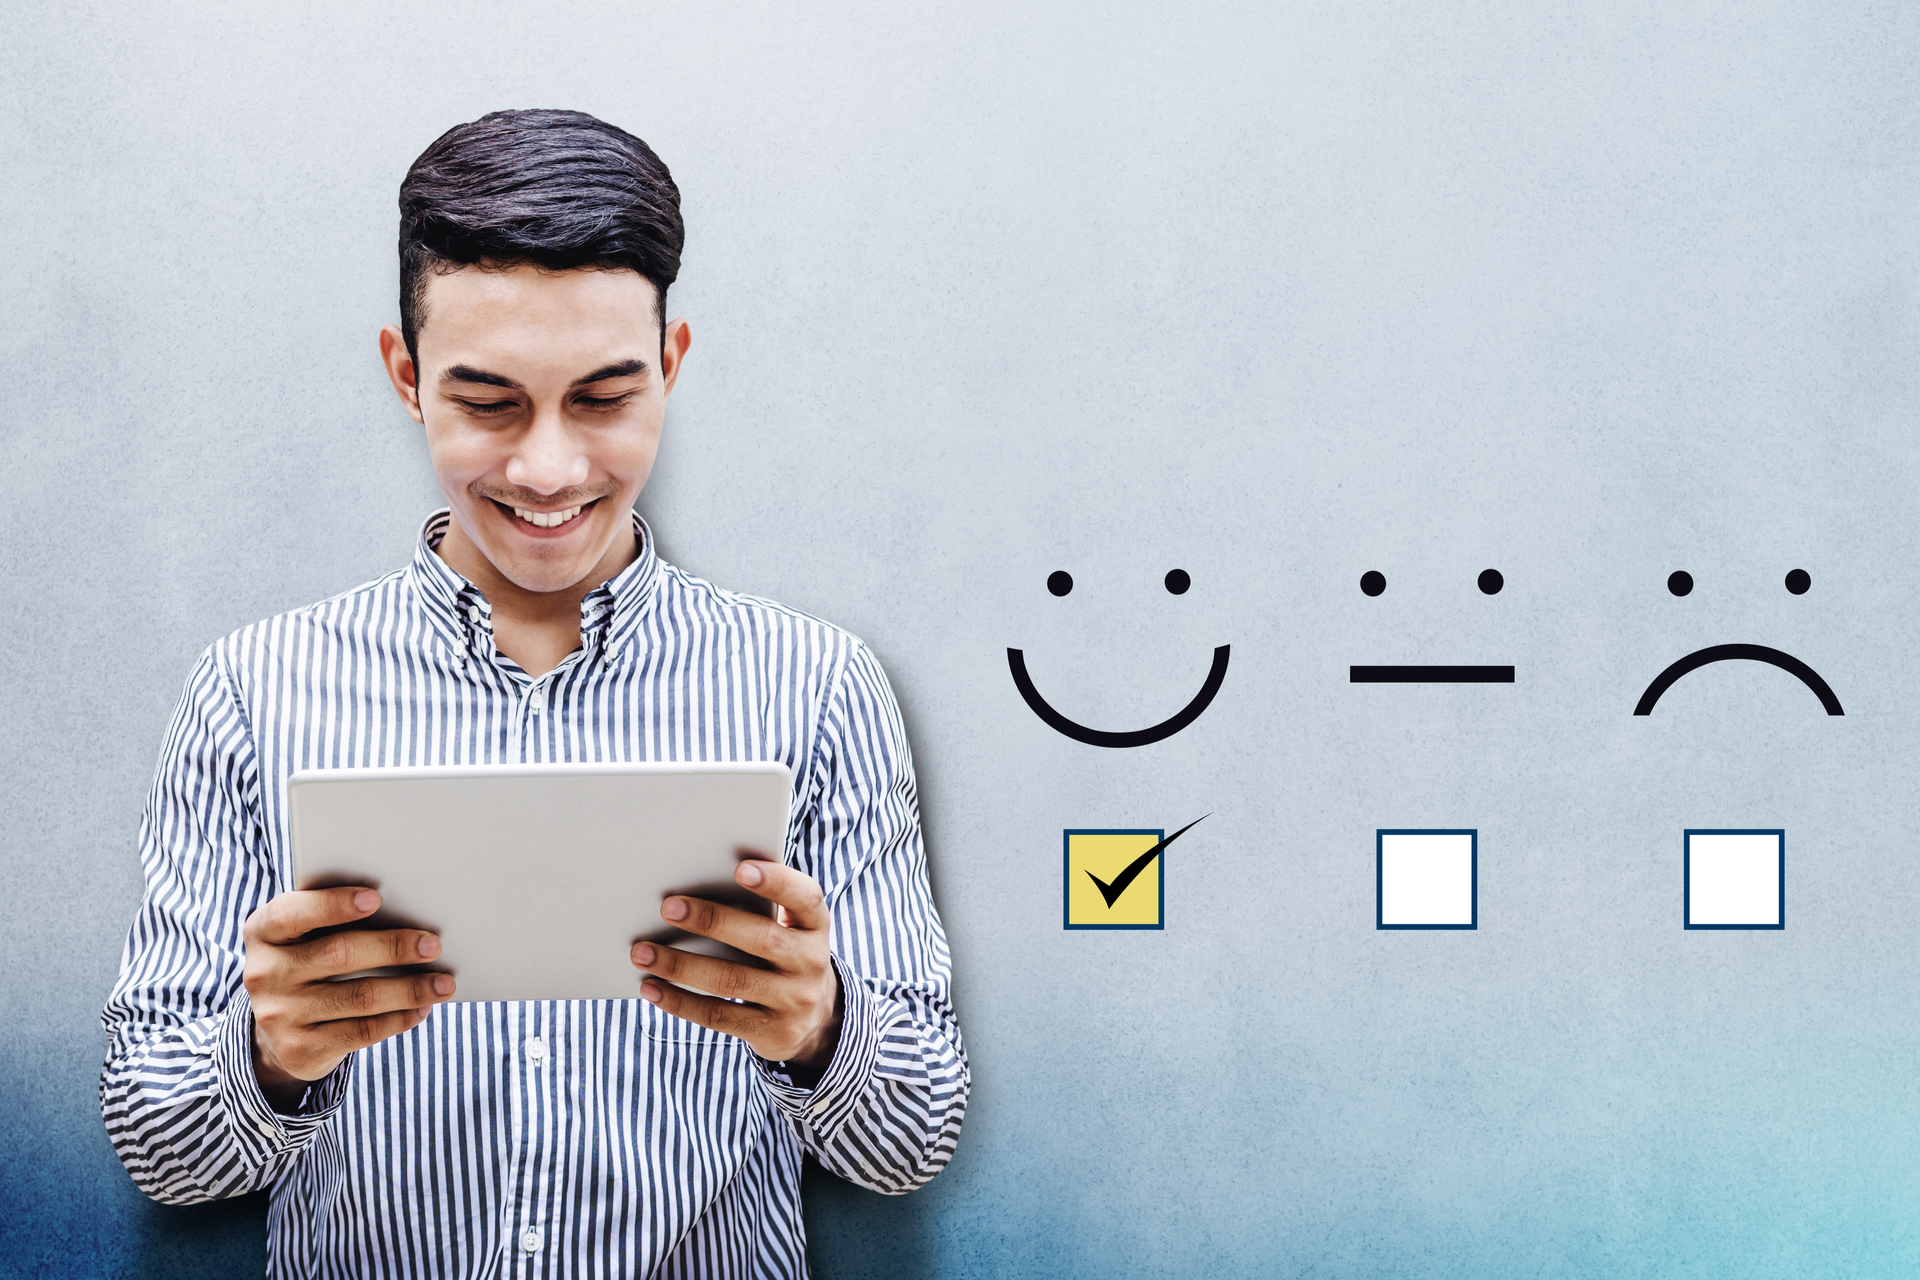 Happy Businessman holding digital Tablet with a checked box on Excellent Smiley Face Rating for a Satisfaction Survey